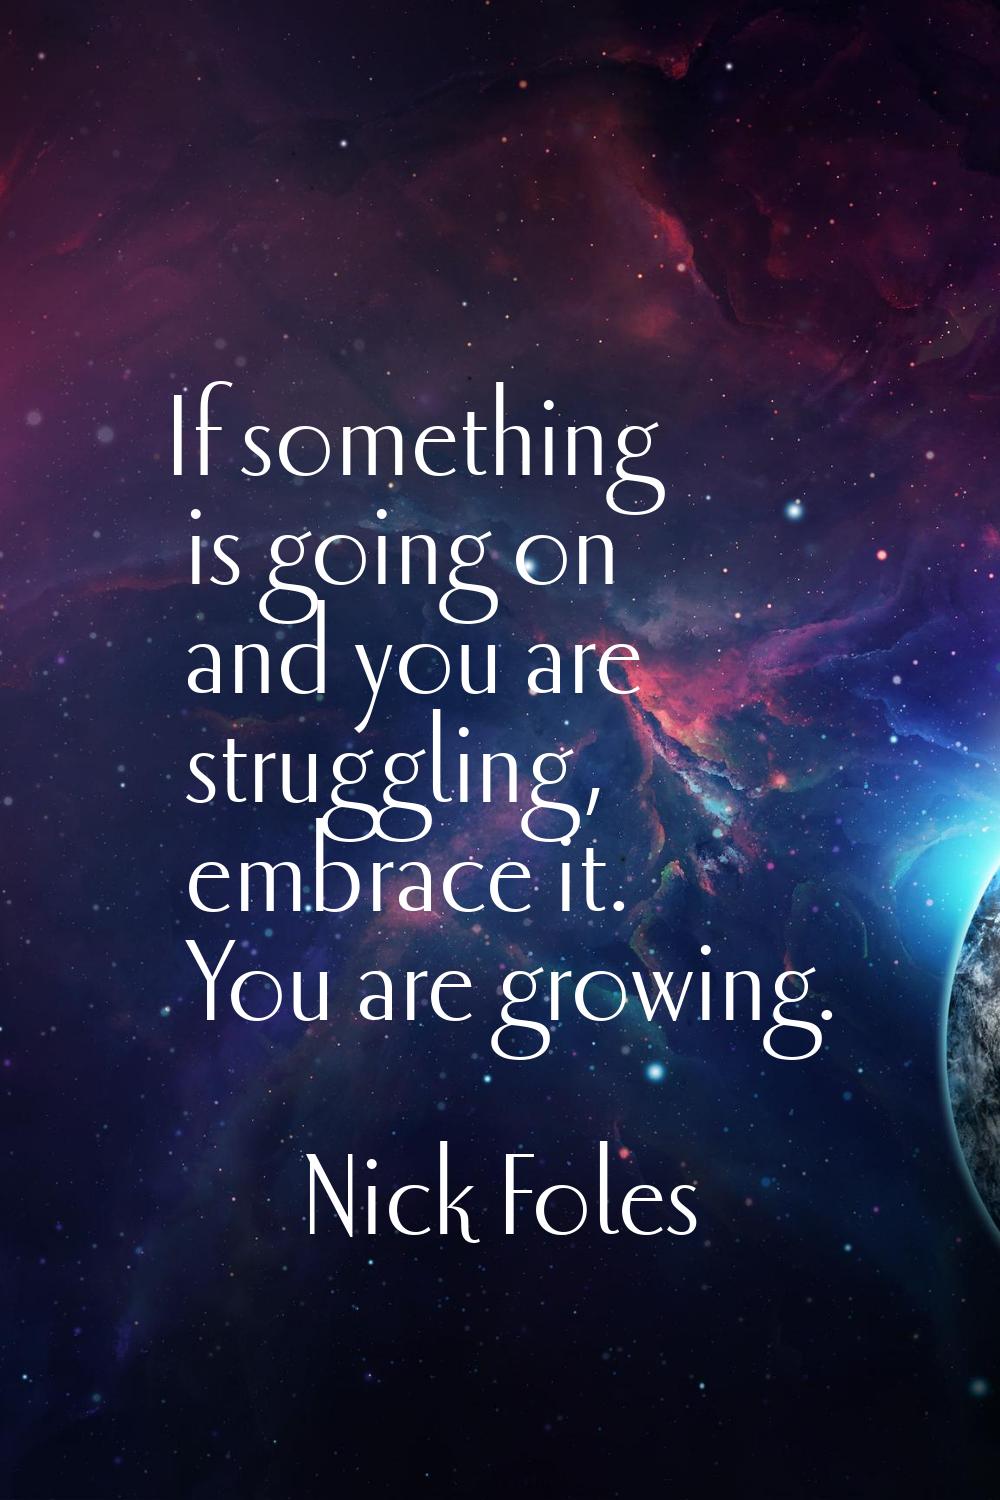 If something is going on and you are struggling, embrace it. You are growing.